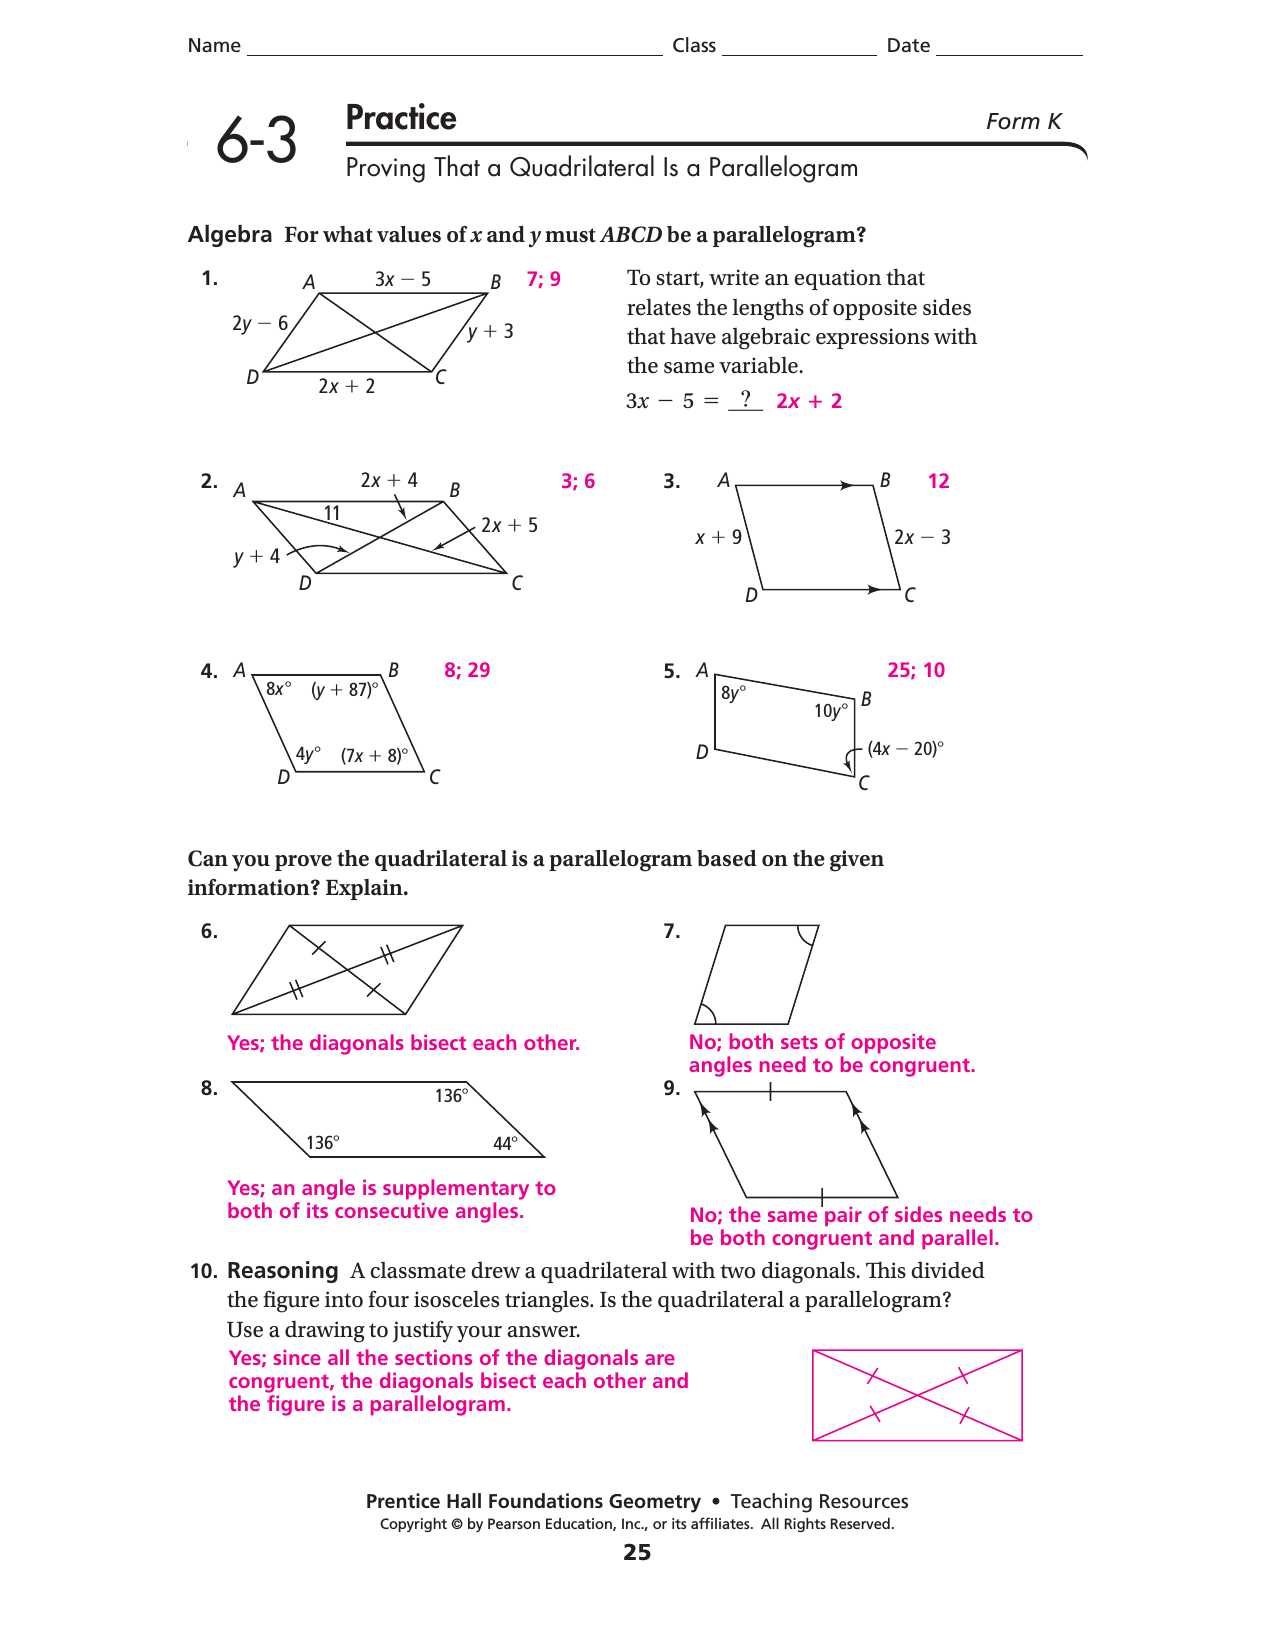 Geometry Parallelogram Worksheet Answers with Parallelogram Worksheet Geometry Answers the Best Worksheets Image